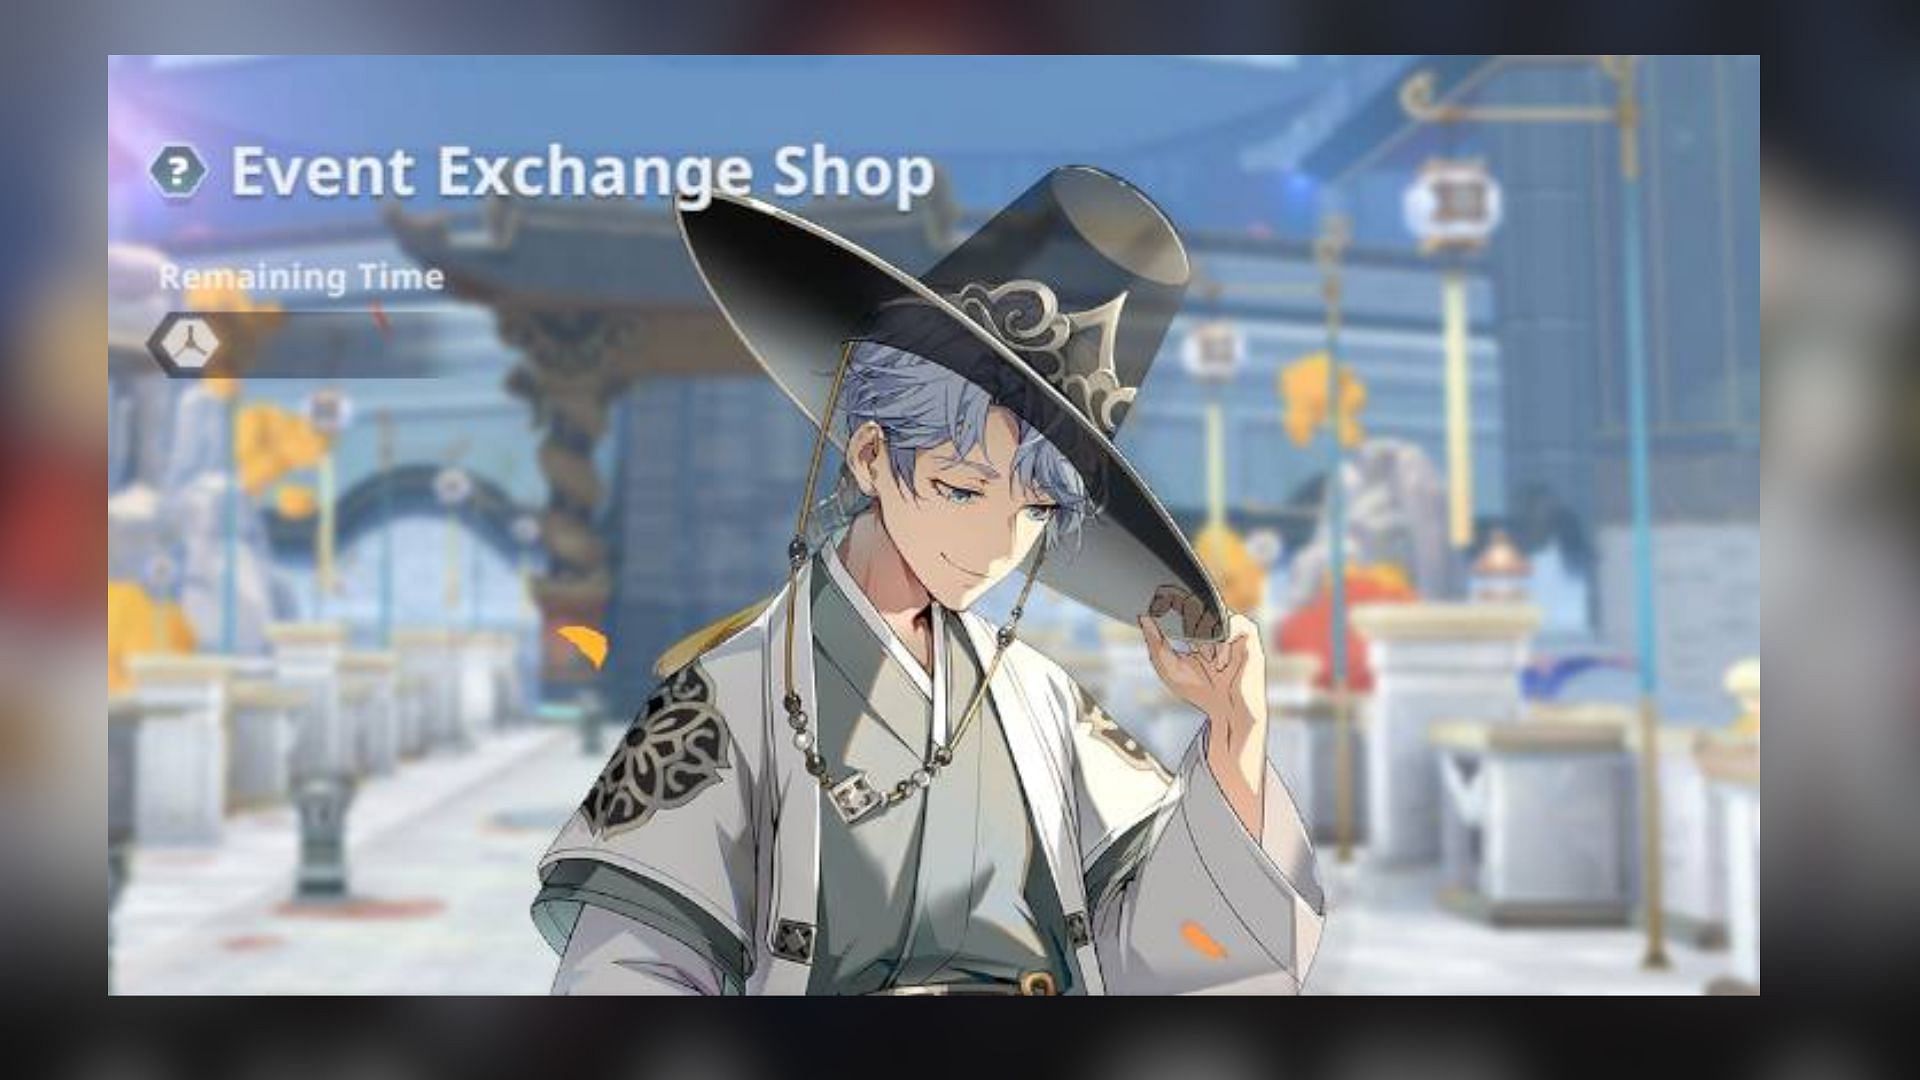 Players can exchange event items for various rewards at the Event Exchange Shop (Image via Netmarble)